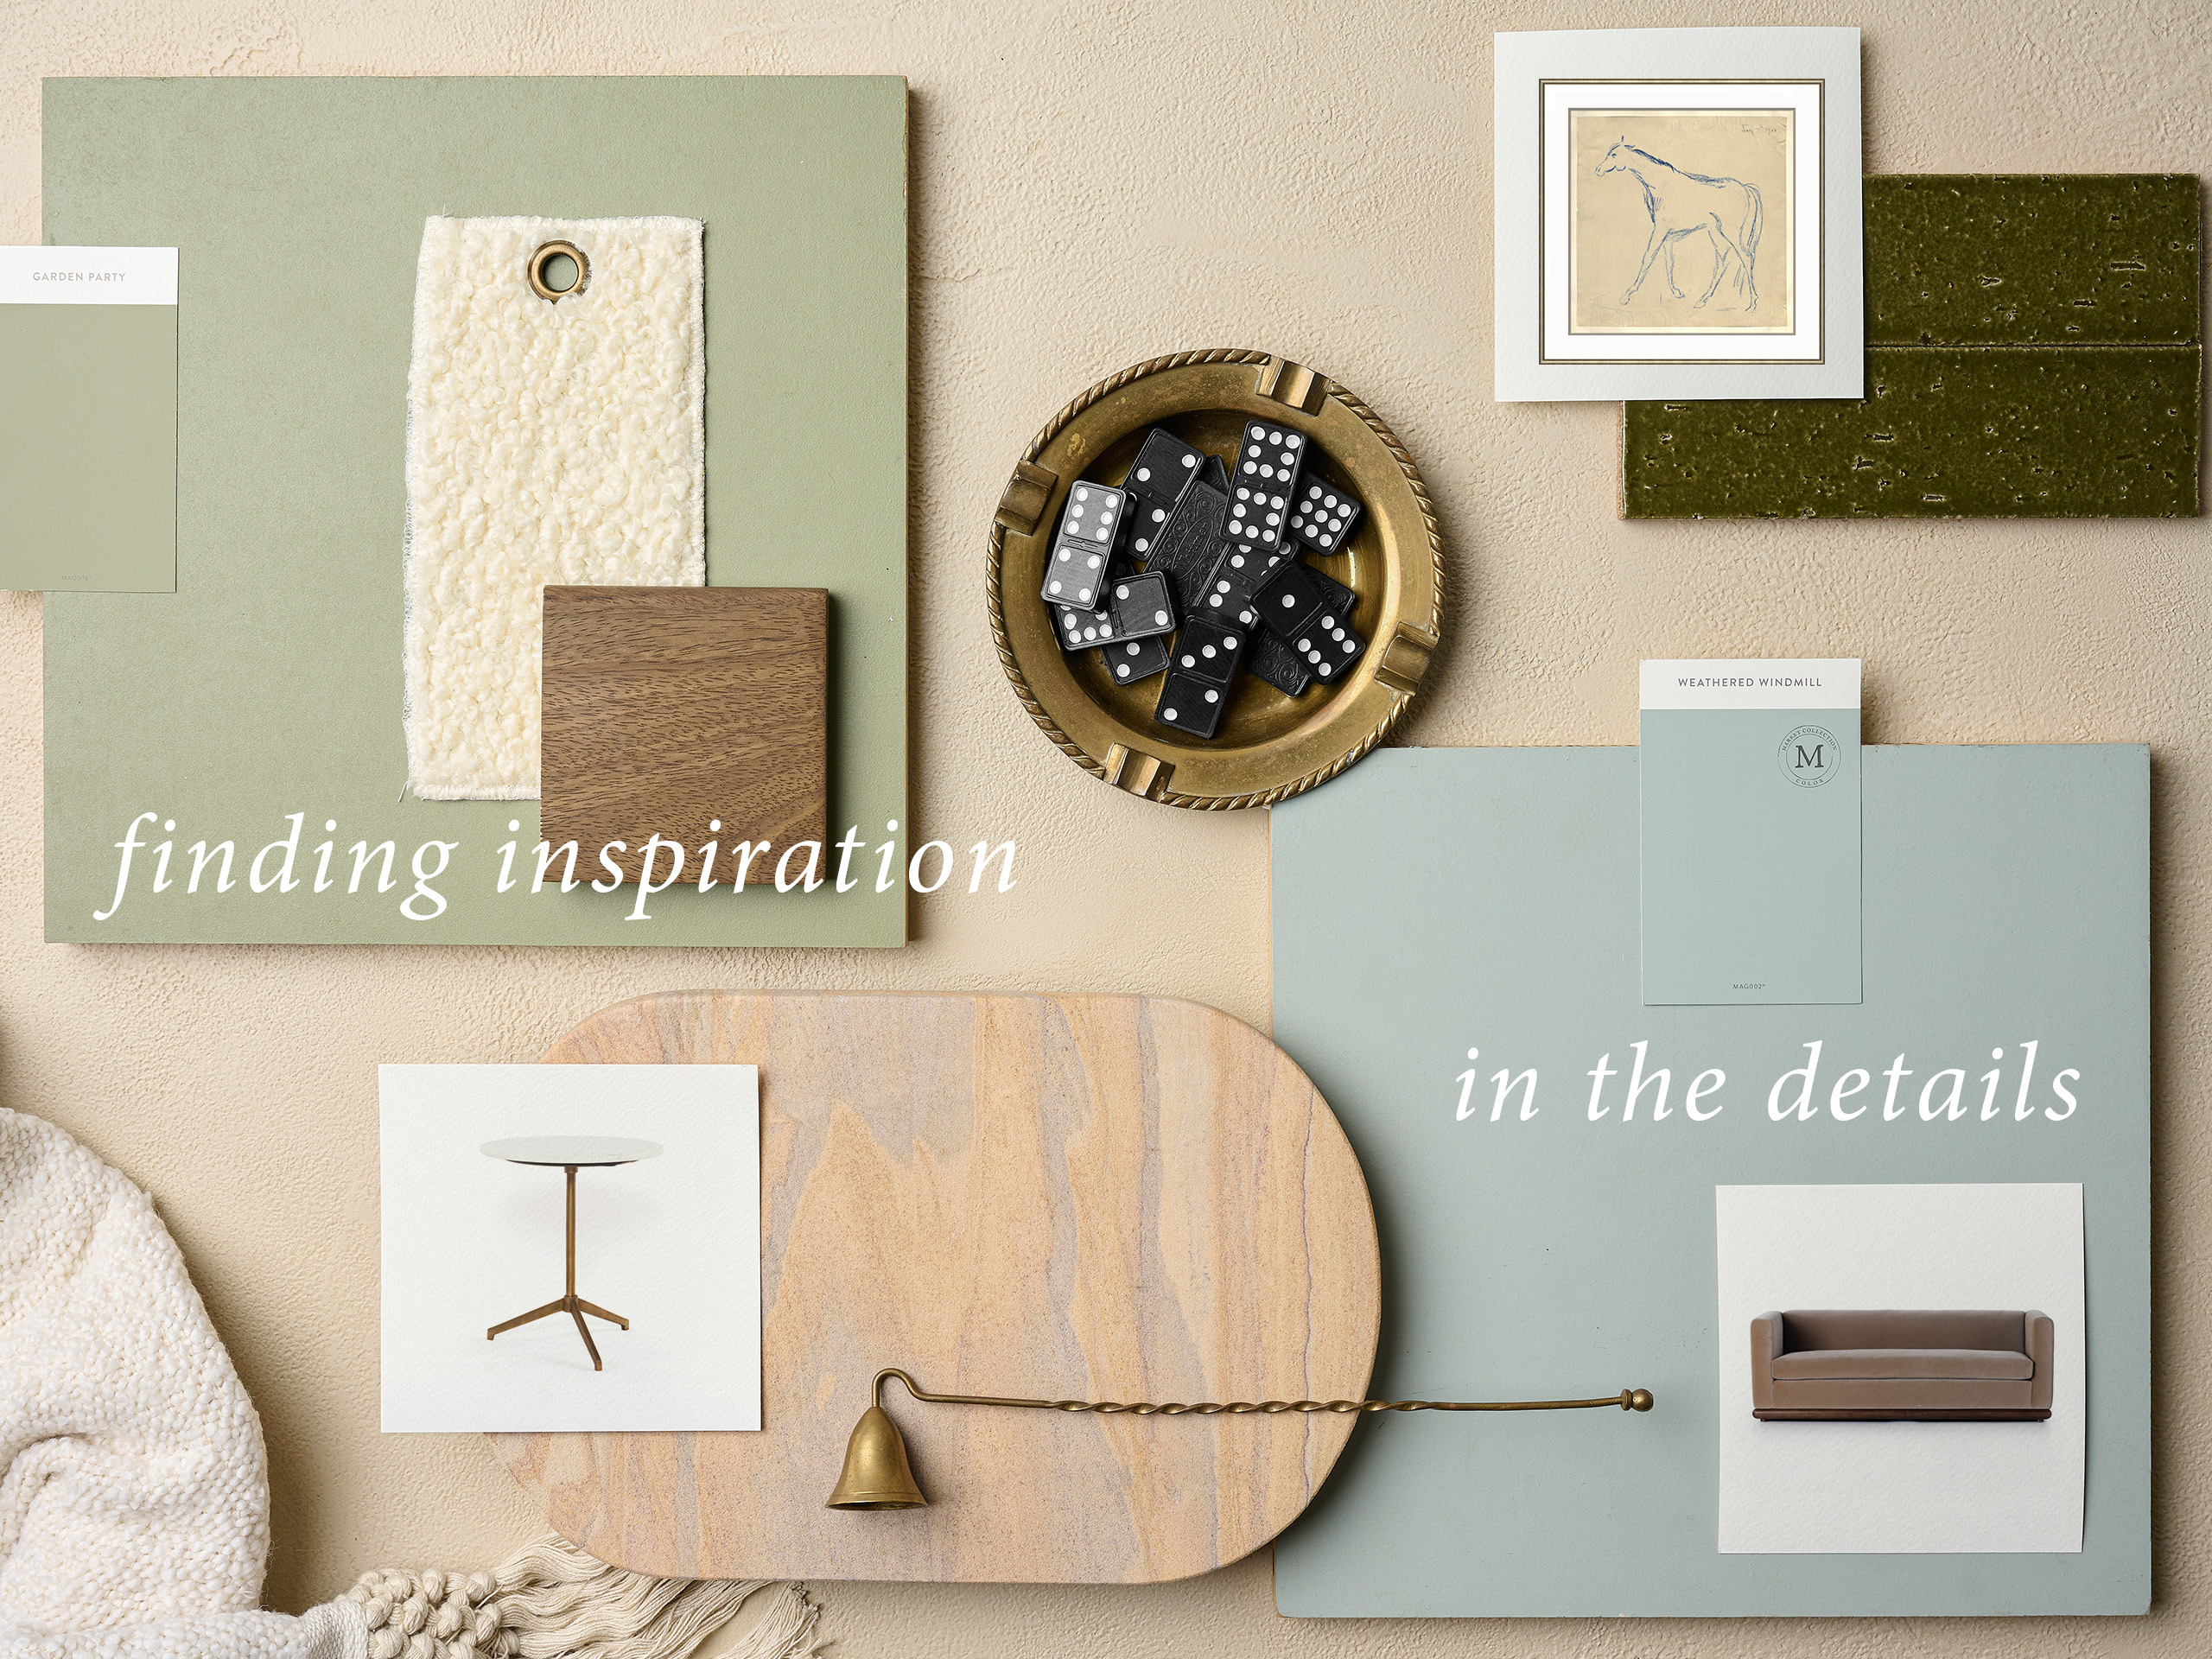 finding inspiration in the details. samples of paints and woods and decor are laid out against a beige background